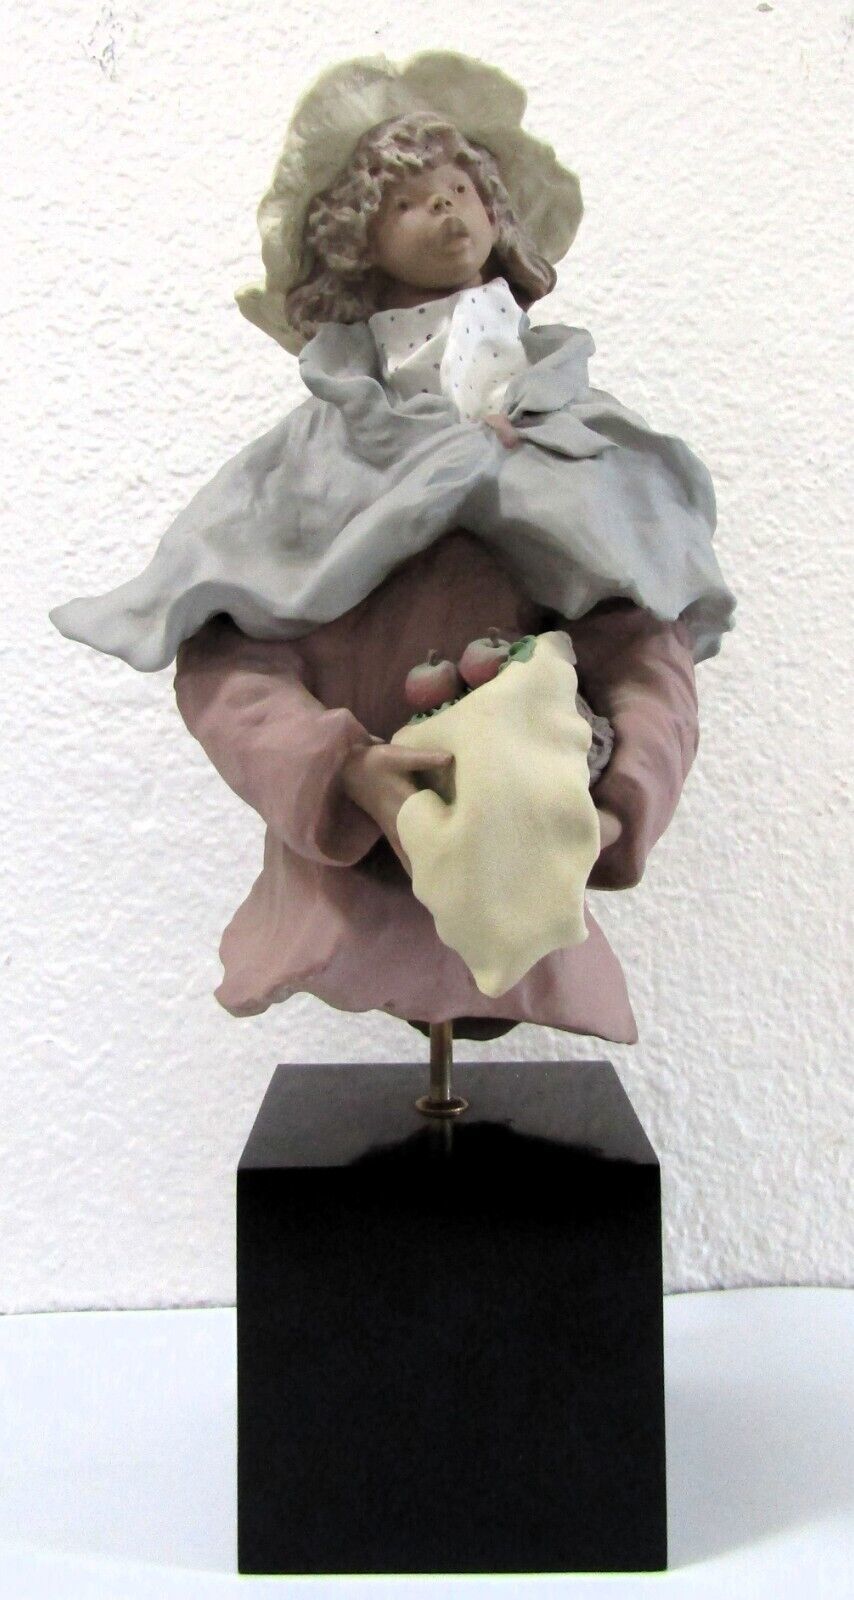 Primary image for Lladro Rare Singed San Isidro Sculpture 1990 Maggie Girl with Apple Ltd. Edition